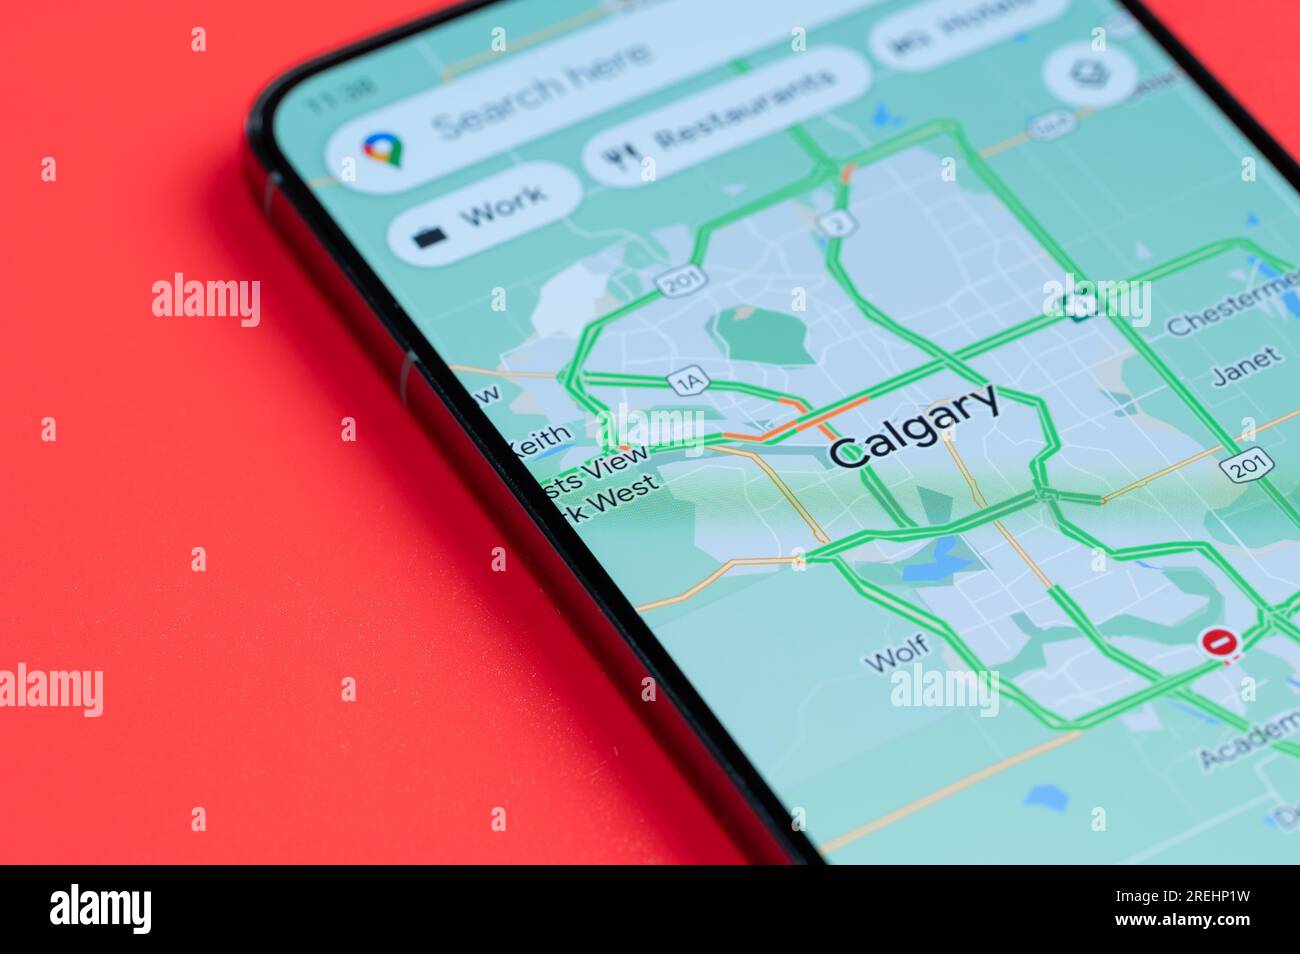 New York, USA - July 21, 2023: Car traffic in Calgary  on google maps in smartphone screen close up view Stock Photo